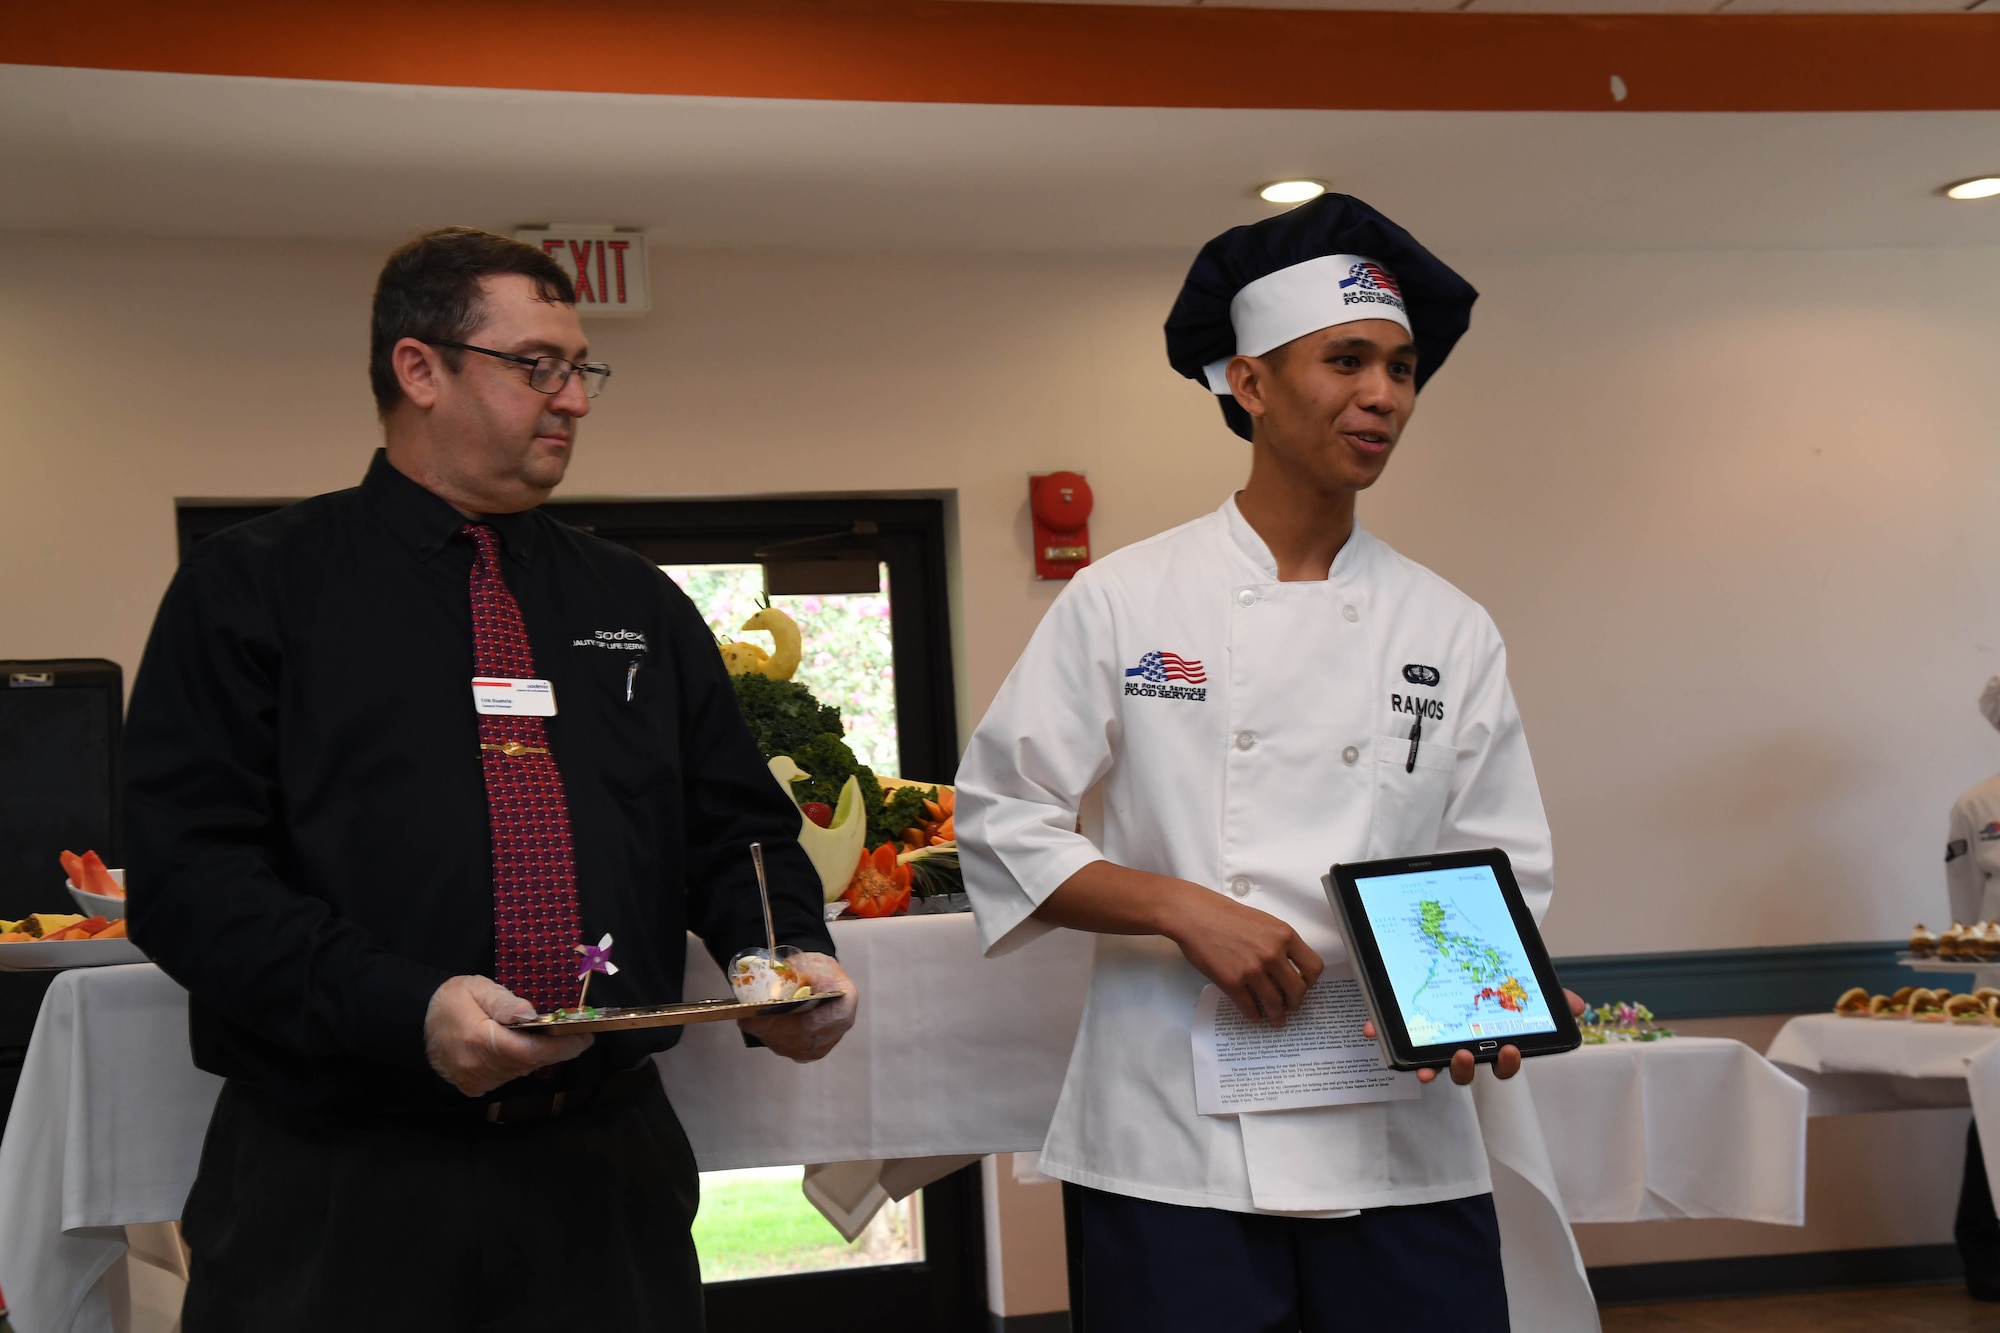 Airman Vick-Ramos Ramos, 2nd Force Support Squadron food services apprentice presents his dish during an advanced culinary skills course graduation at the Red River Dining Facility at Barksdale Air Force Base, La., Aug. 18, 2017.Ramos’ presentation included facts about the dishes’ origin and connection to the Philippines.